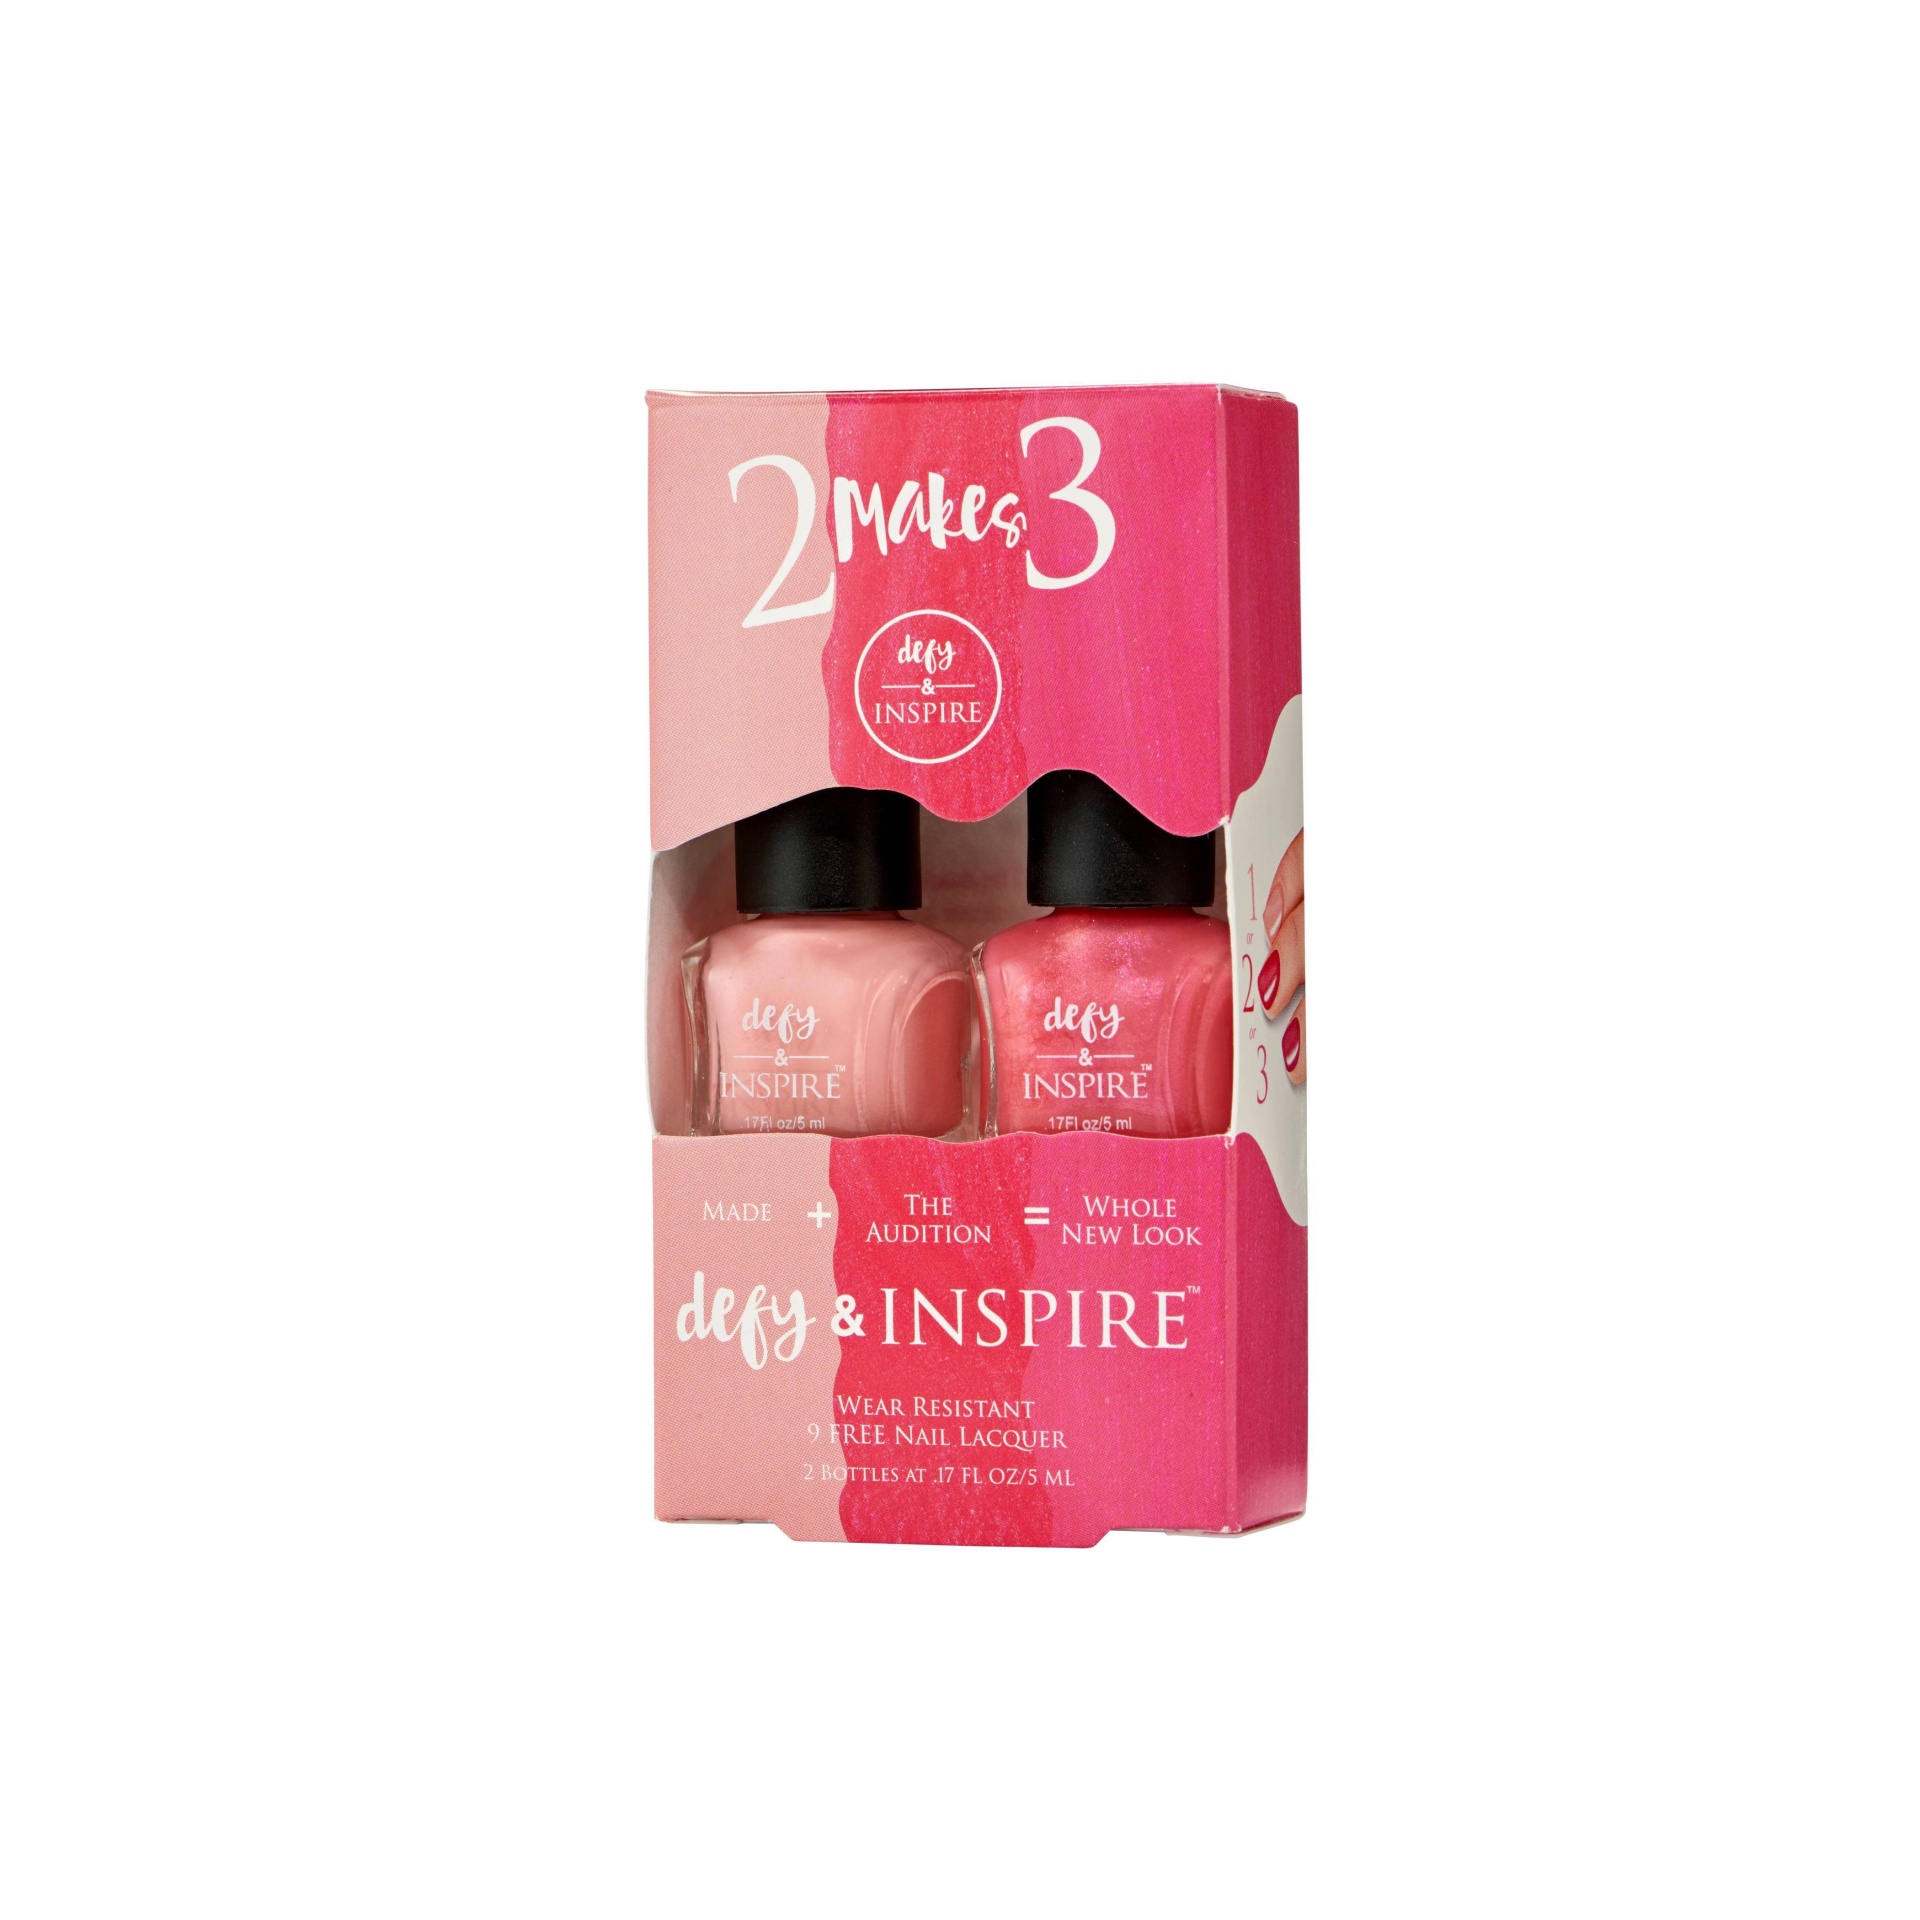 slide 1 of 1, Defy & Inspire Duo Nail Polish Set 2 Makes 3 - Made + The Audition - 0.17 fl oz, 1 ct